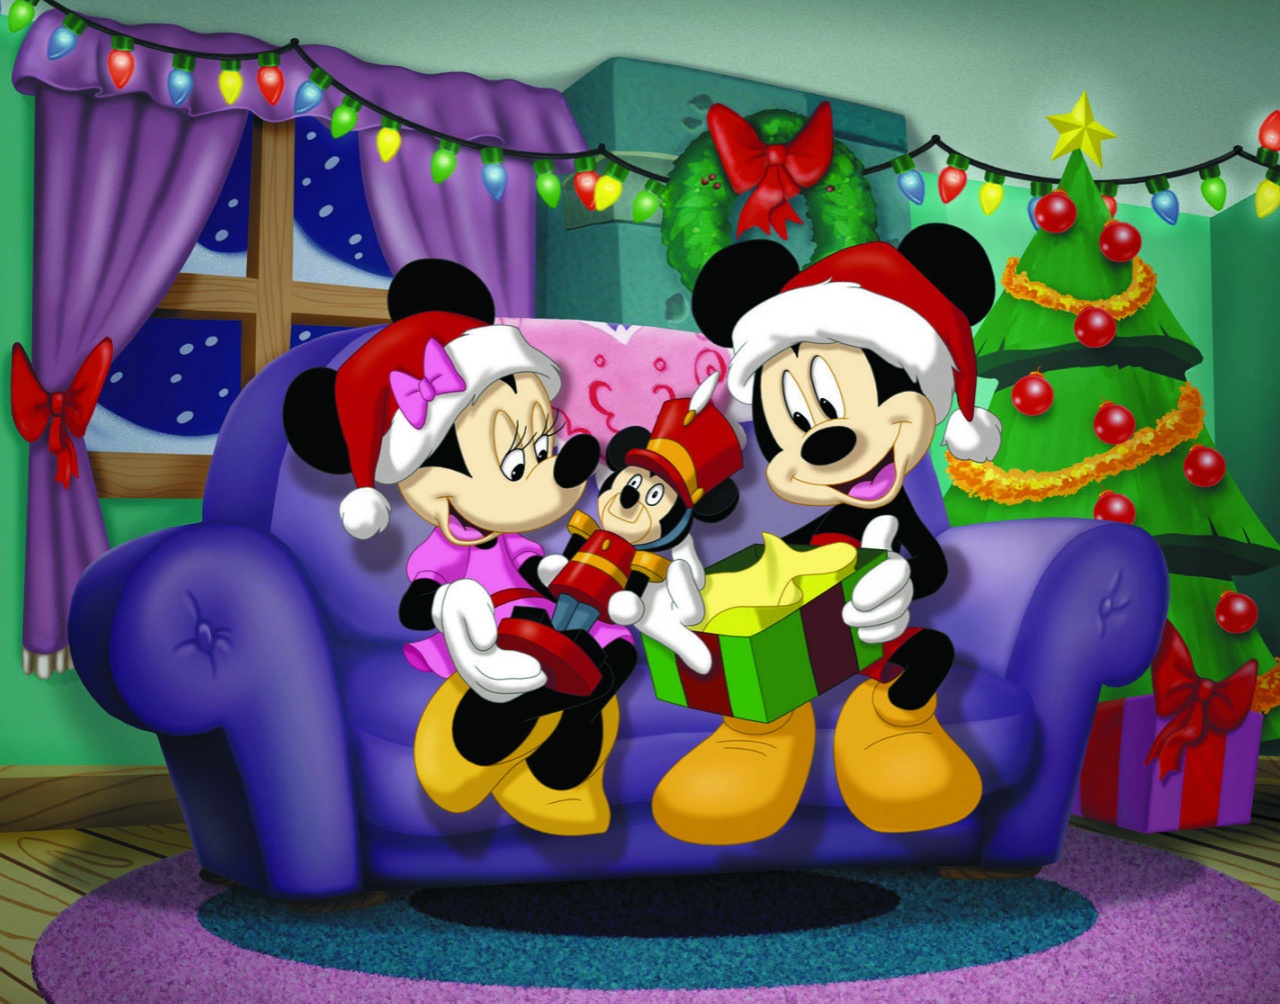 Cartoons Wallpapers For Christmas